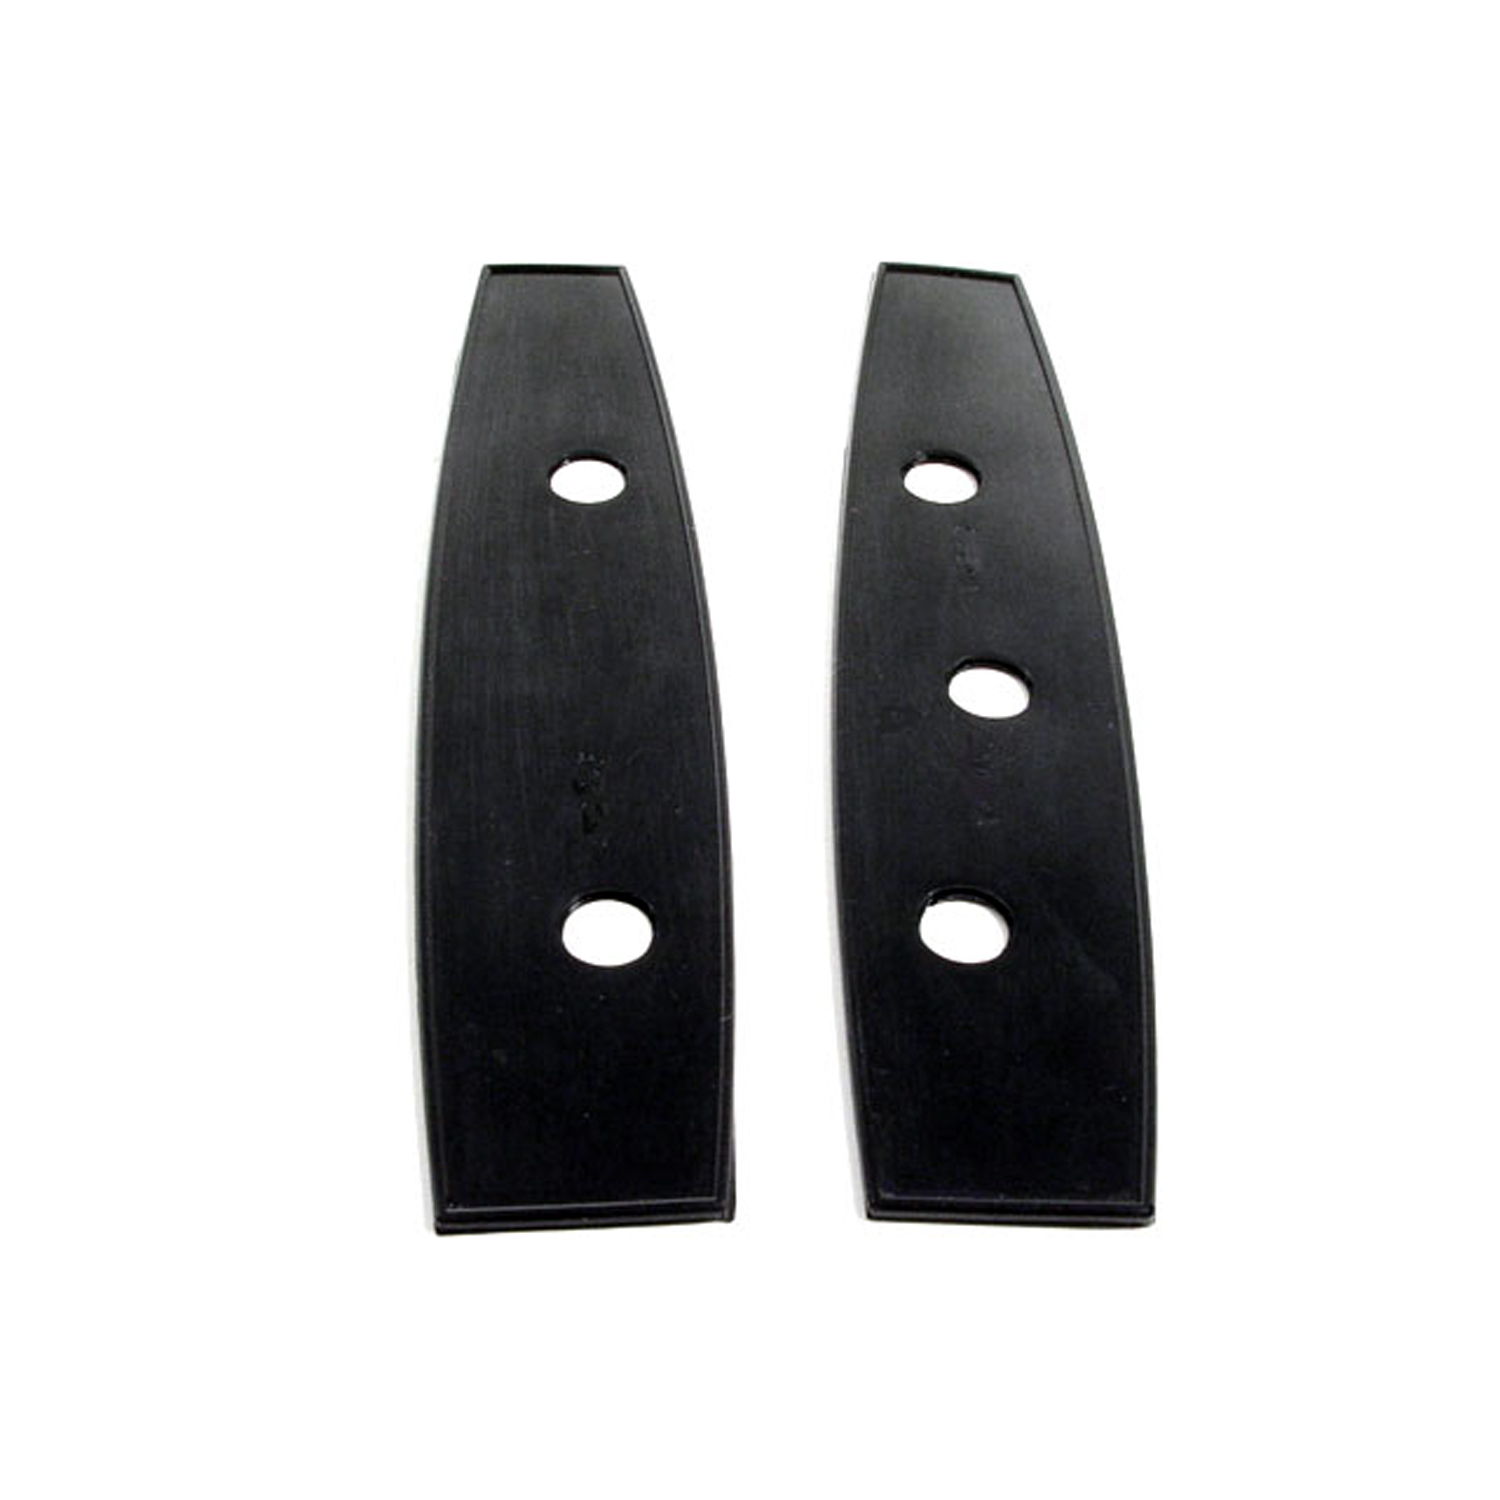 1972 Dodge Challenger Mirror Mounting Pads.  Left side + remote (3-holes)-MP 622-F